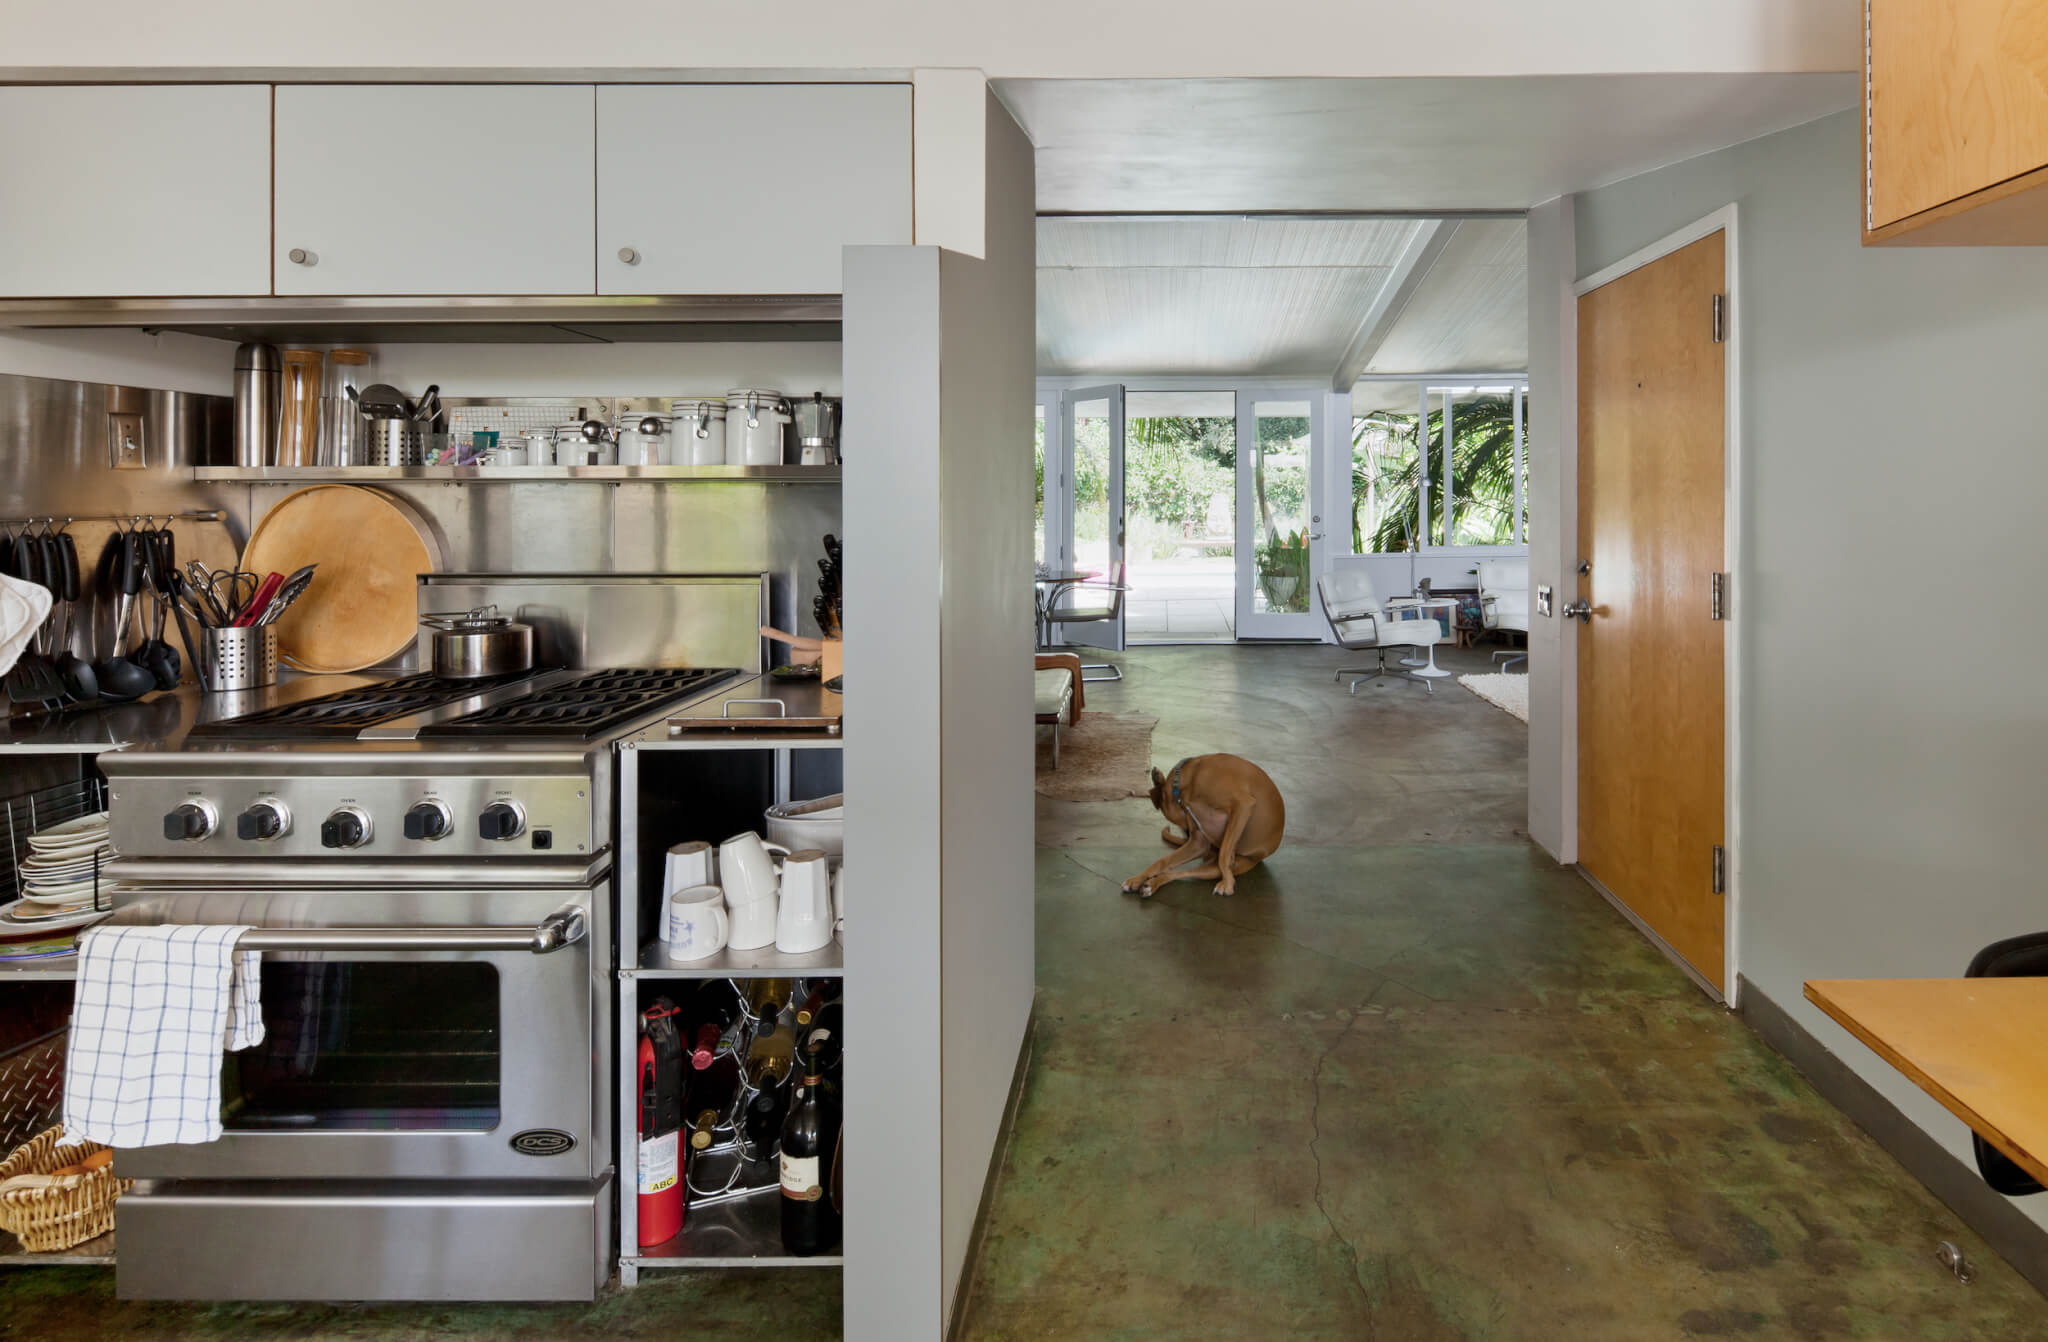 interior of a modernist kitchen with a pooch on the floor